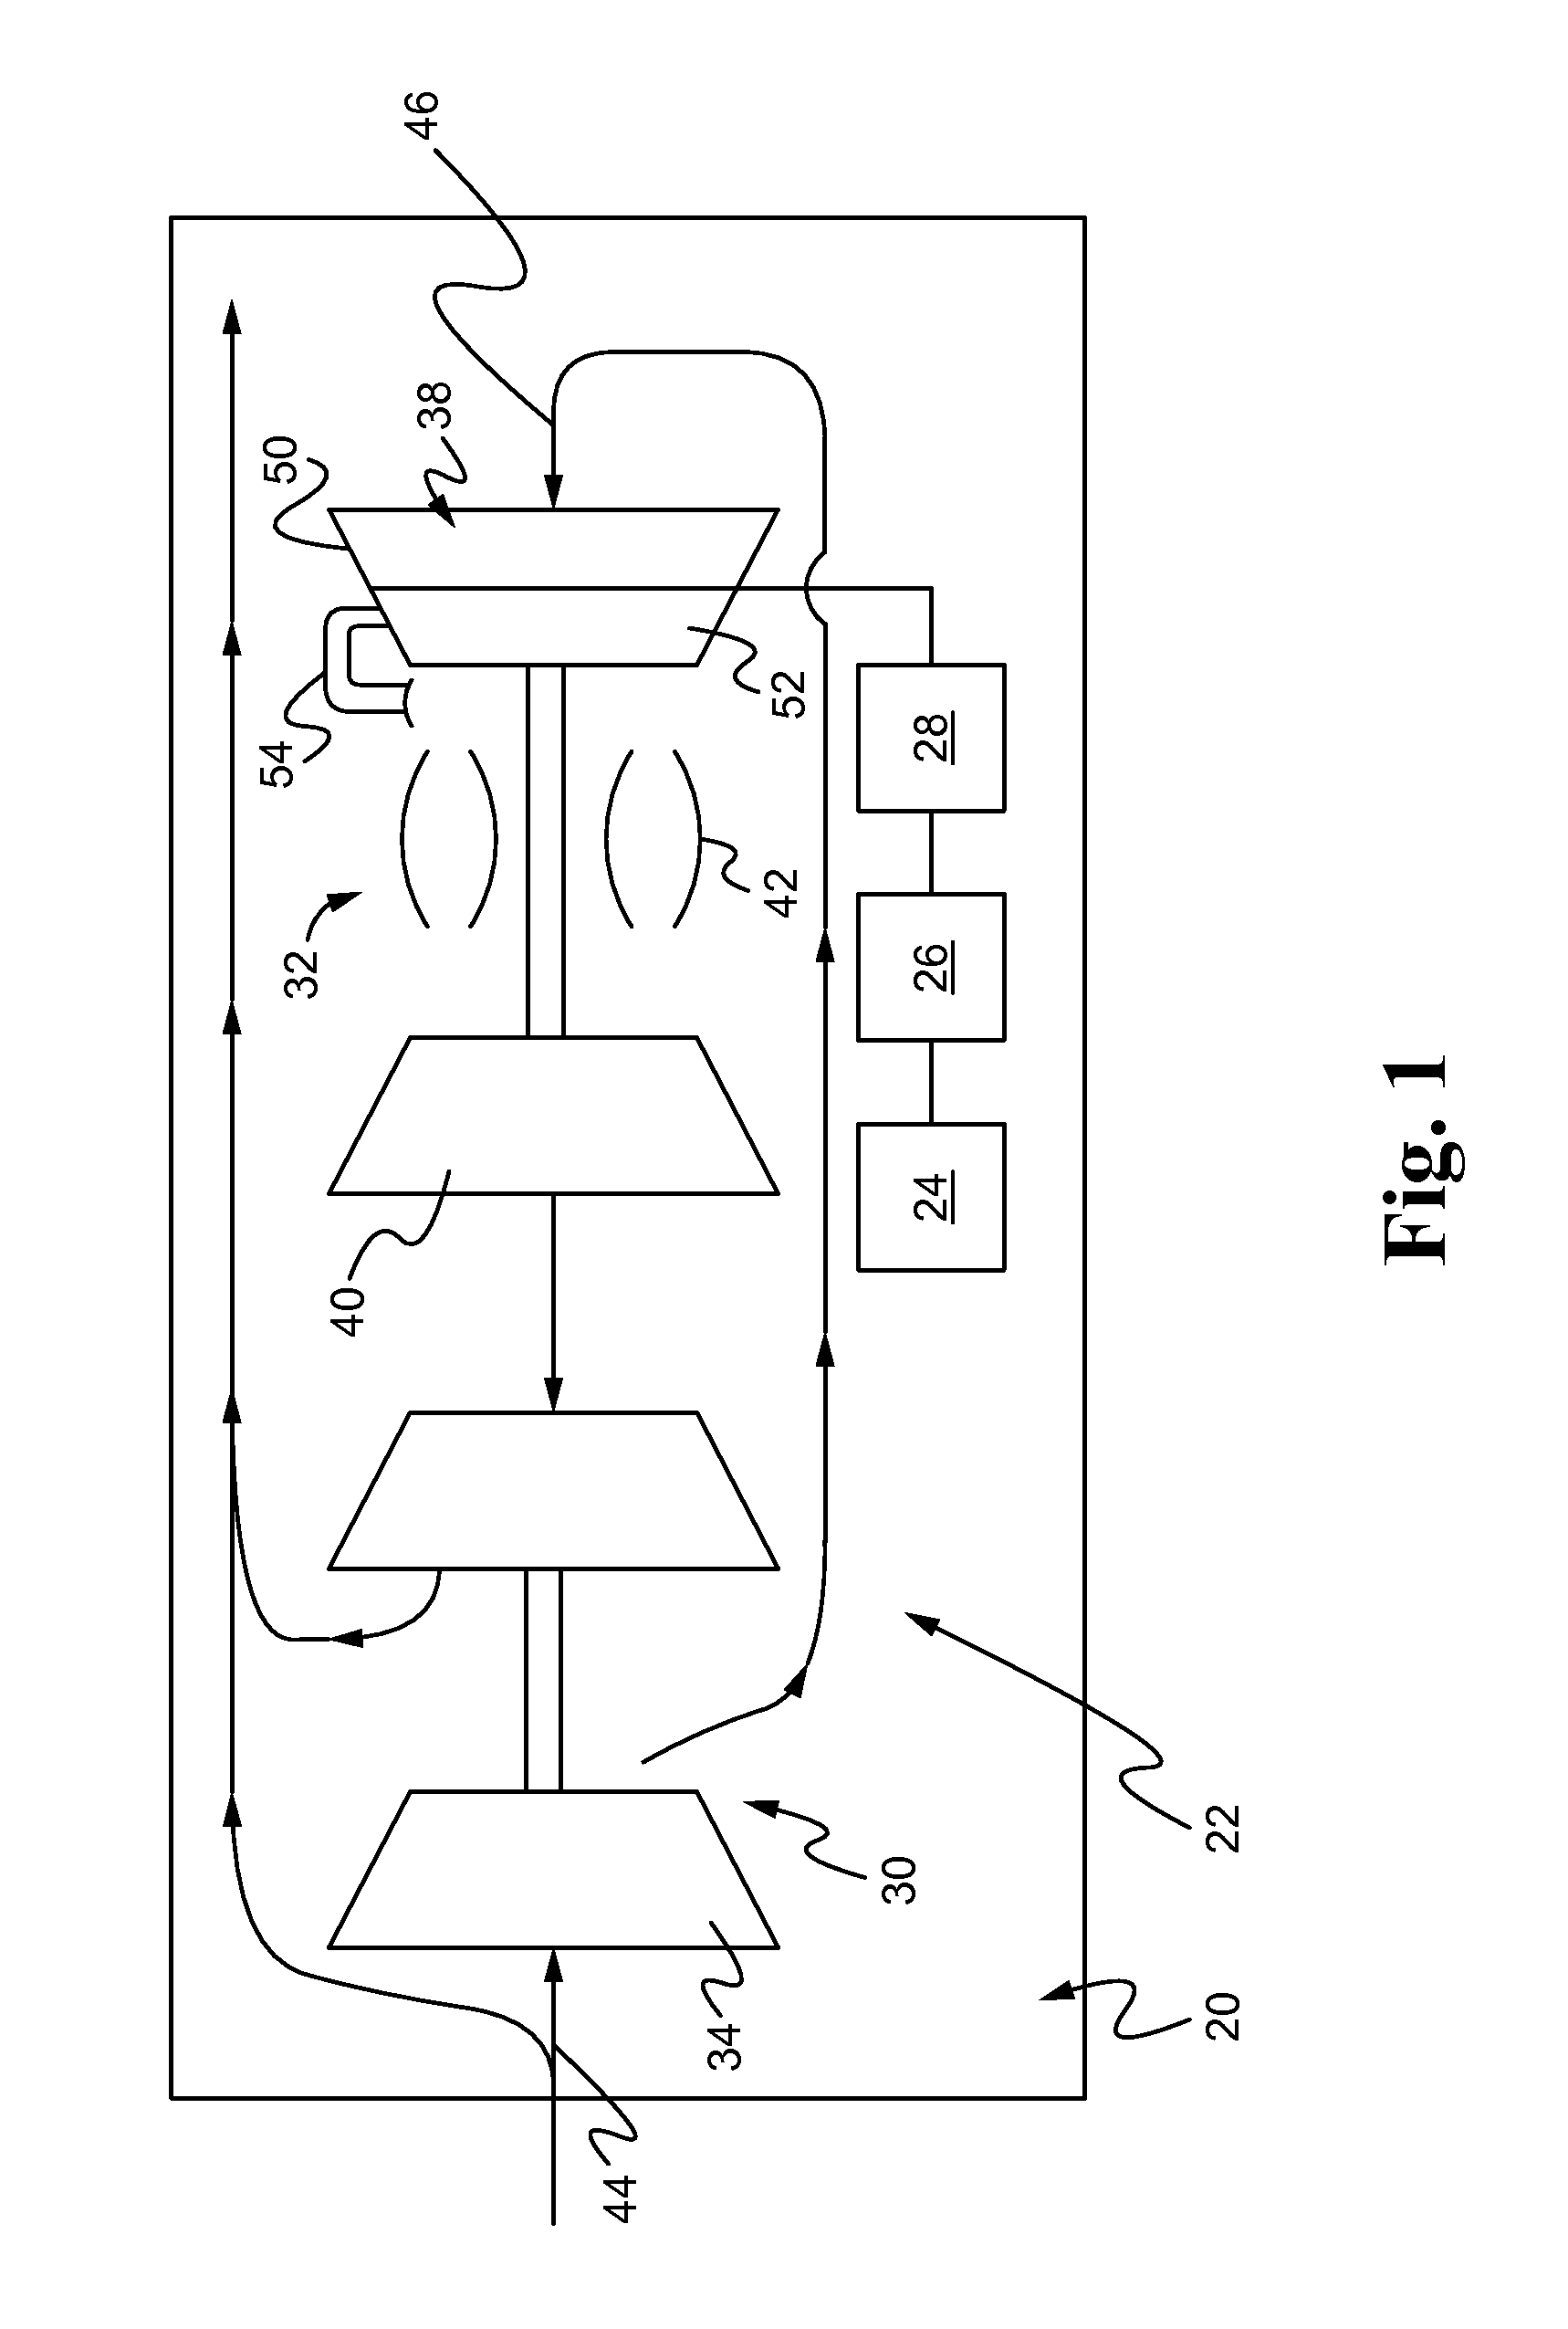 Gas Turbine Engine with Variable Overall Pressure Ratio